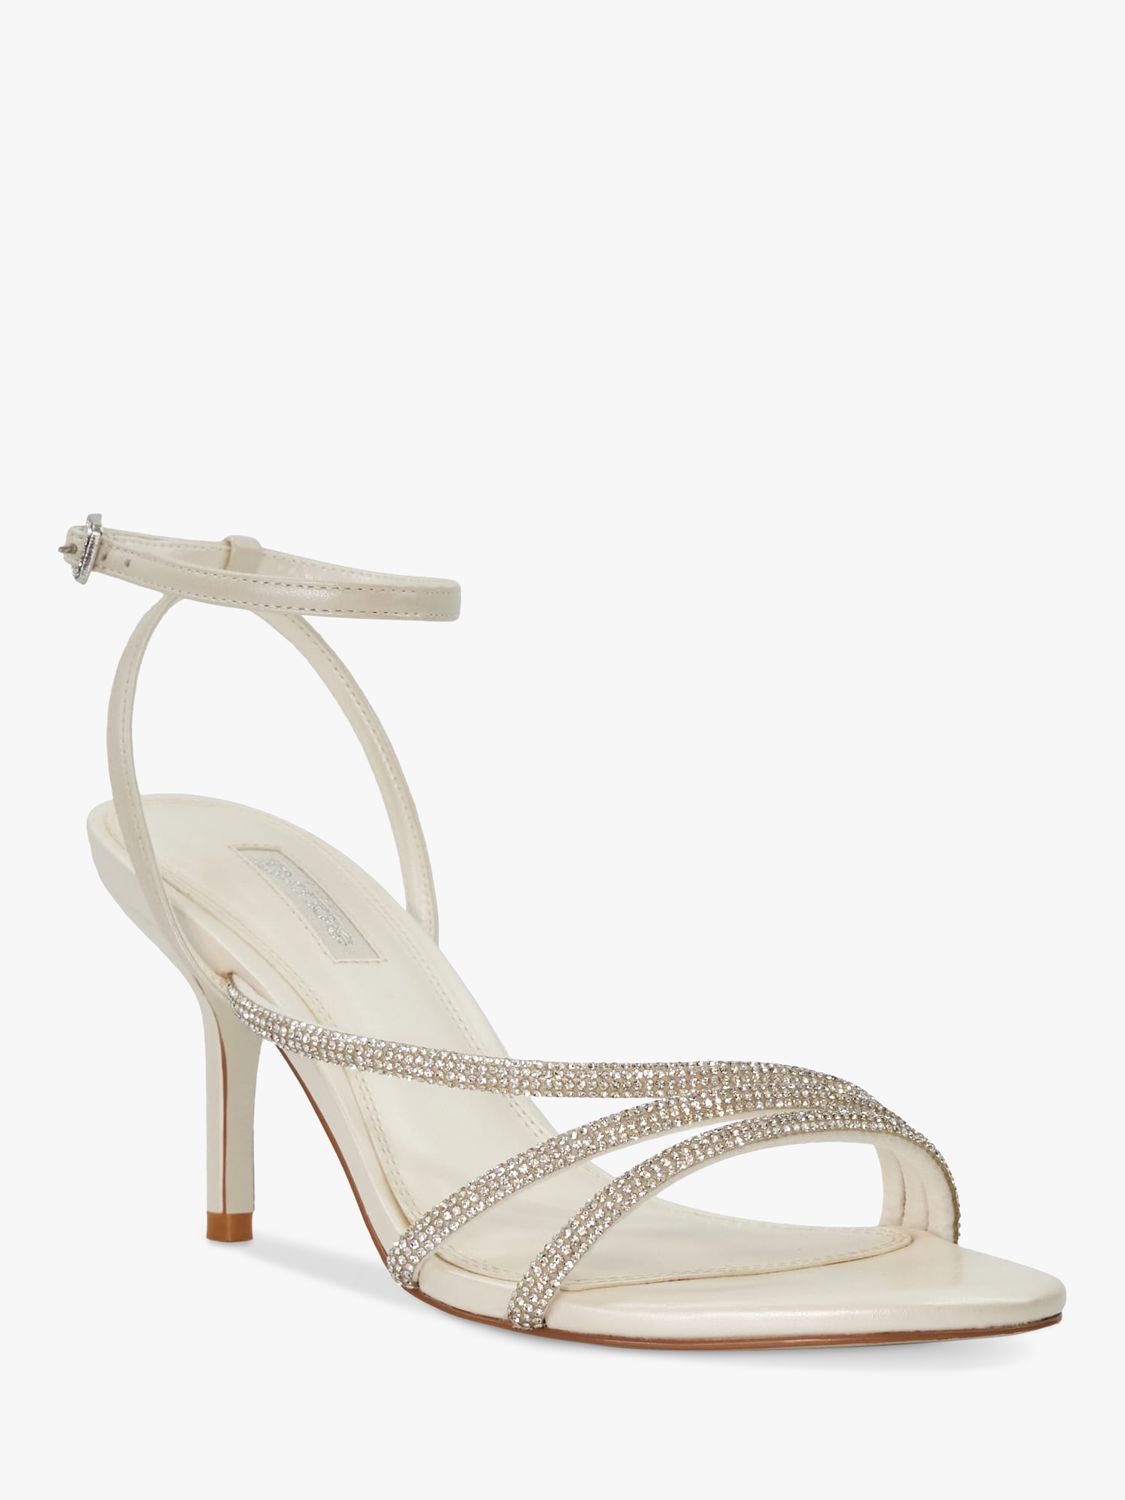 Buy Dune Bridal Collection Midsummers Diamante Strap Sandals, Ivory Online at johnlewis.com